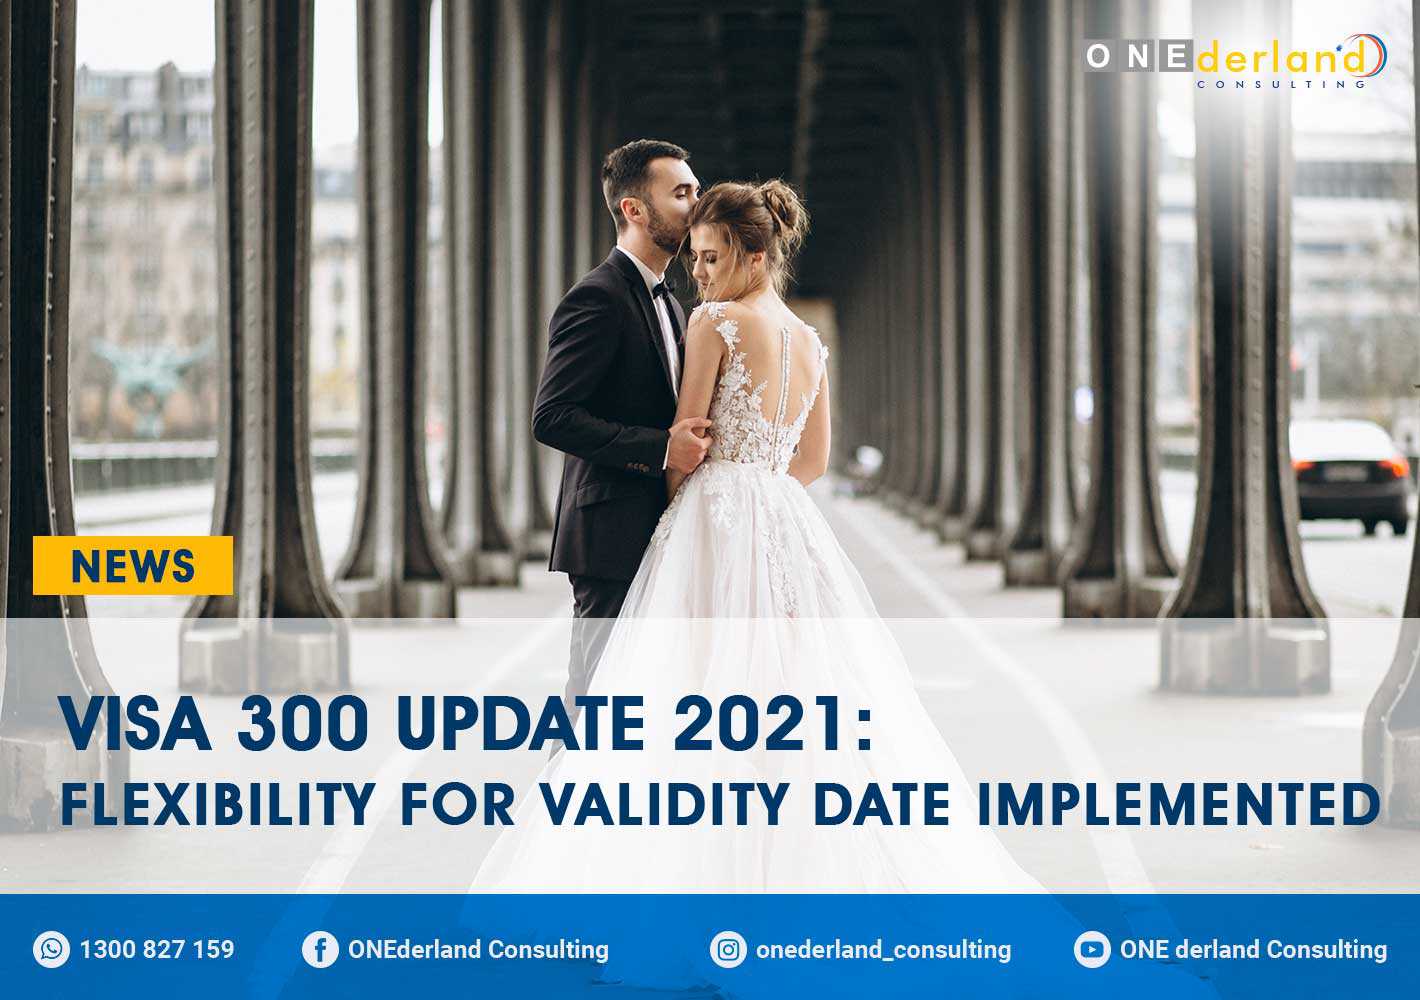 Validity Date for Visa 300 is Extended until the end of 2022 for Holders Impacted by COVID-19